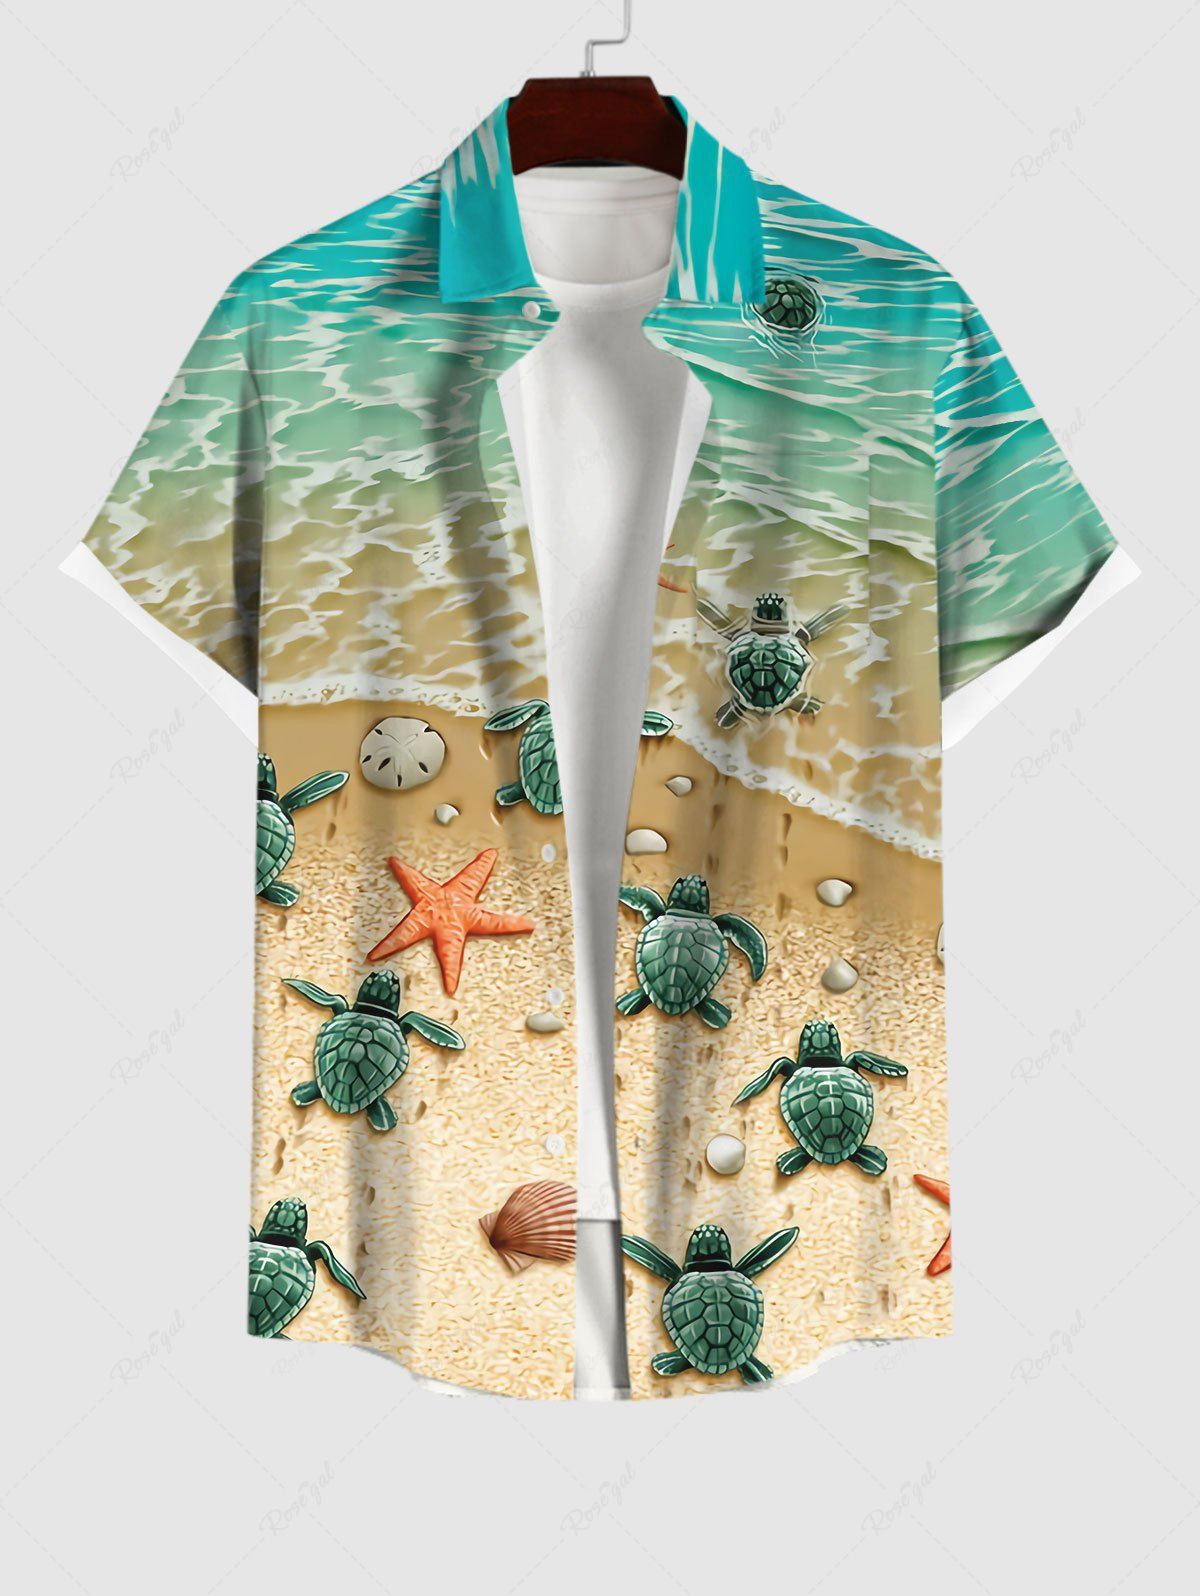 Hawaii Plus Size Sea Creatures Beach Starfish Turtle Shell Print Buttons Pocket Shirt For Men Multi-A L